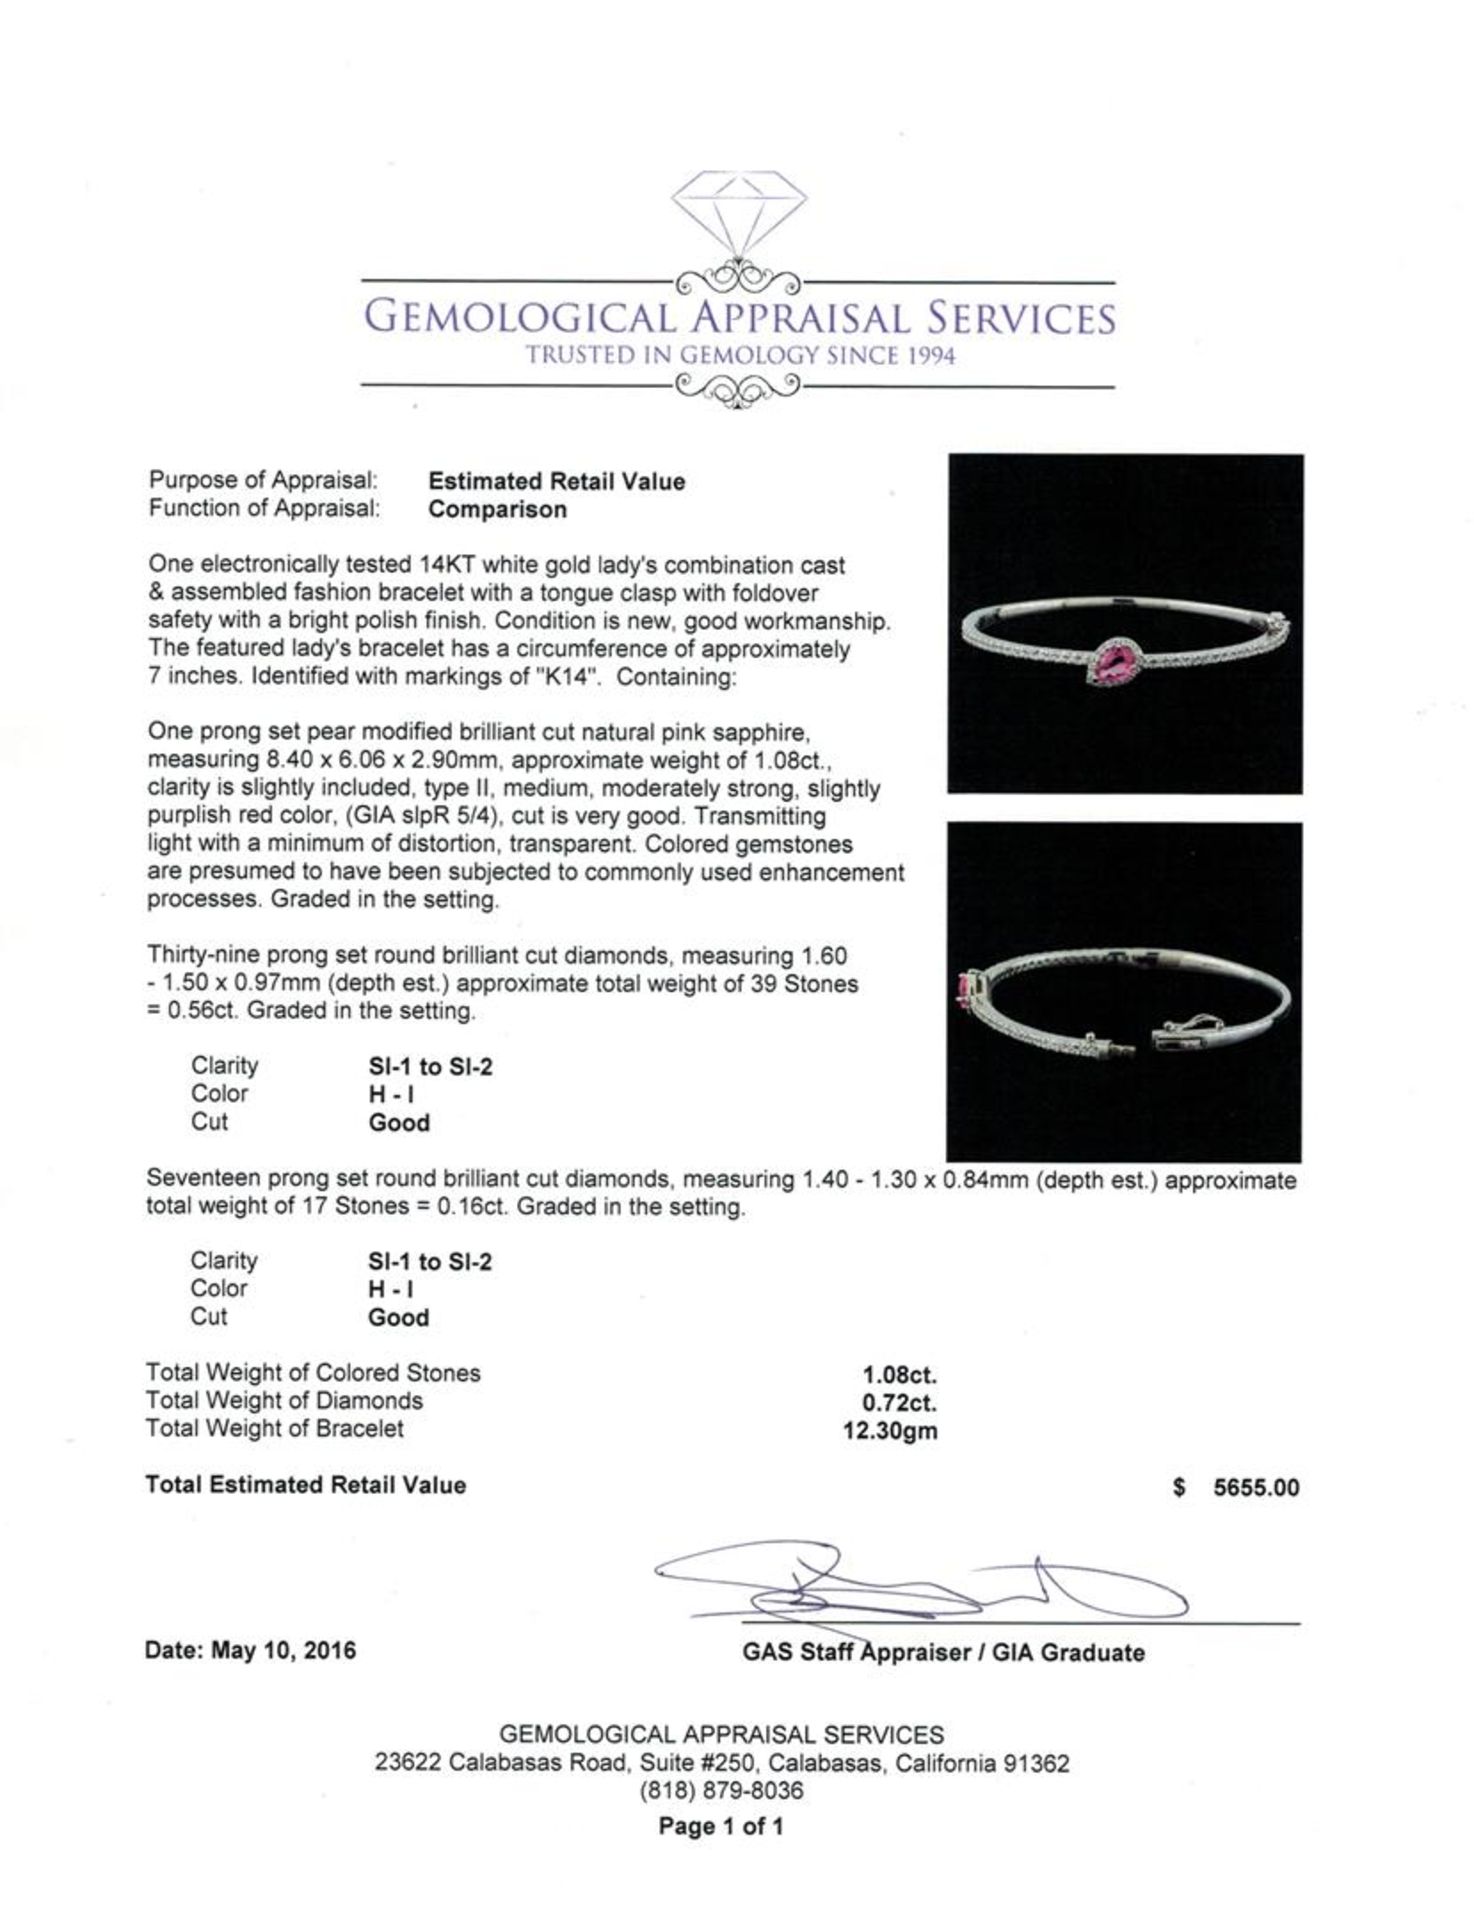 1.08 ctw Pink Sapphire and Diamond Bracelet - 14KT White Gold - Image 4 of 4